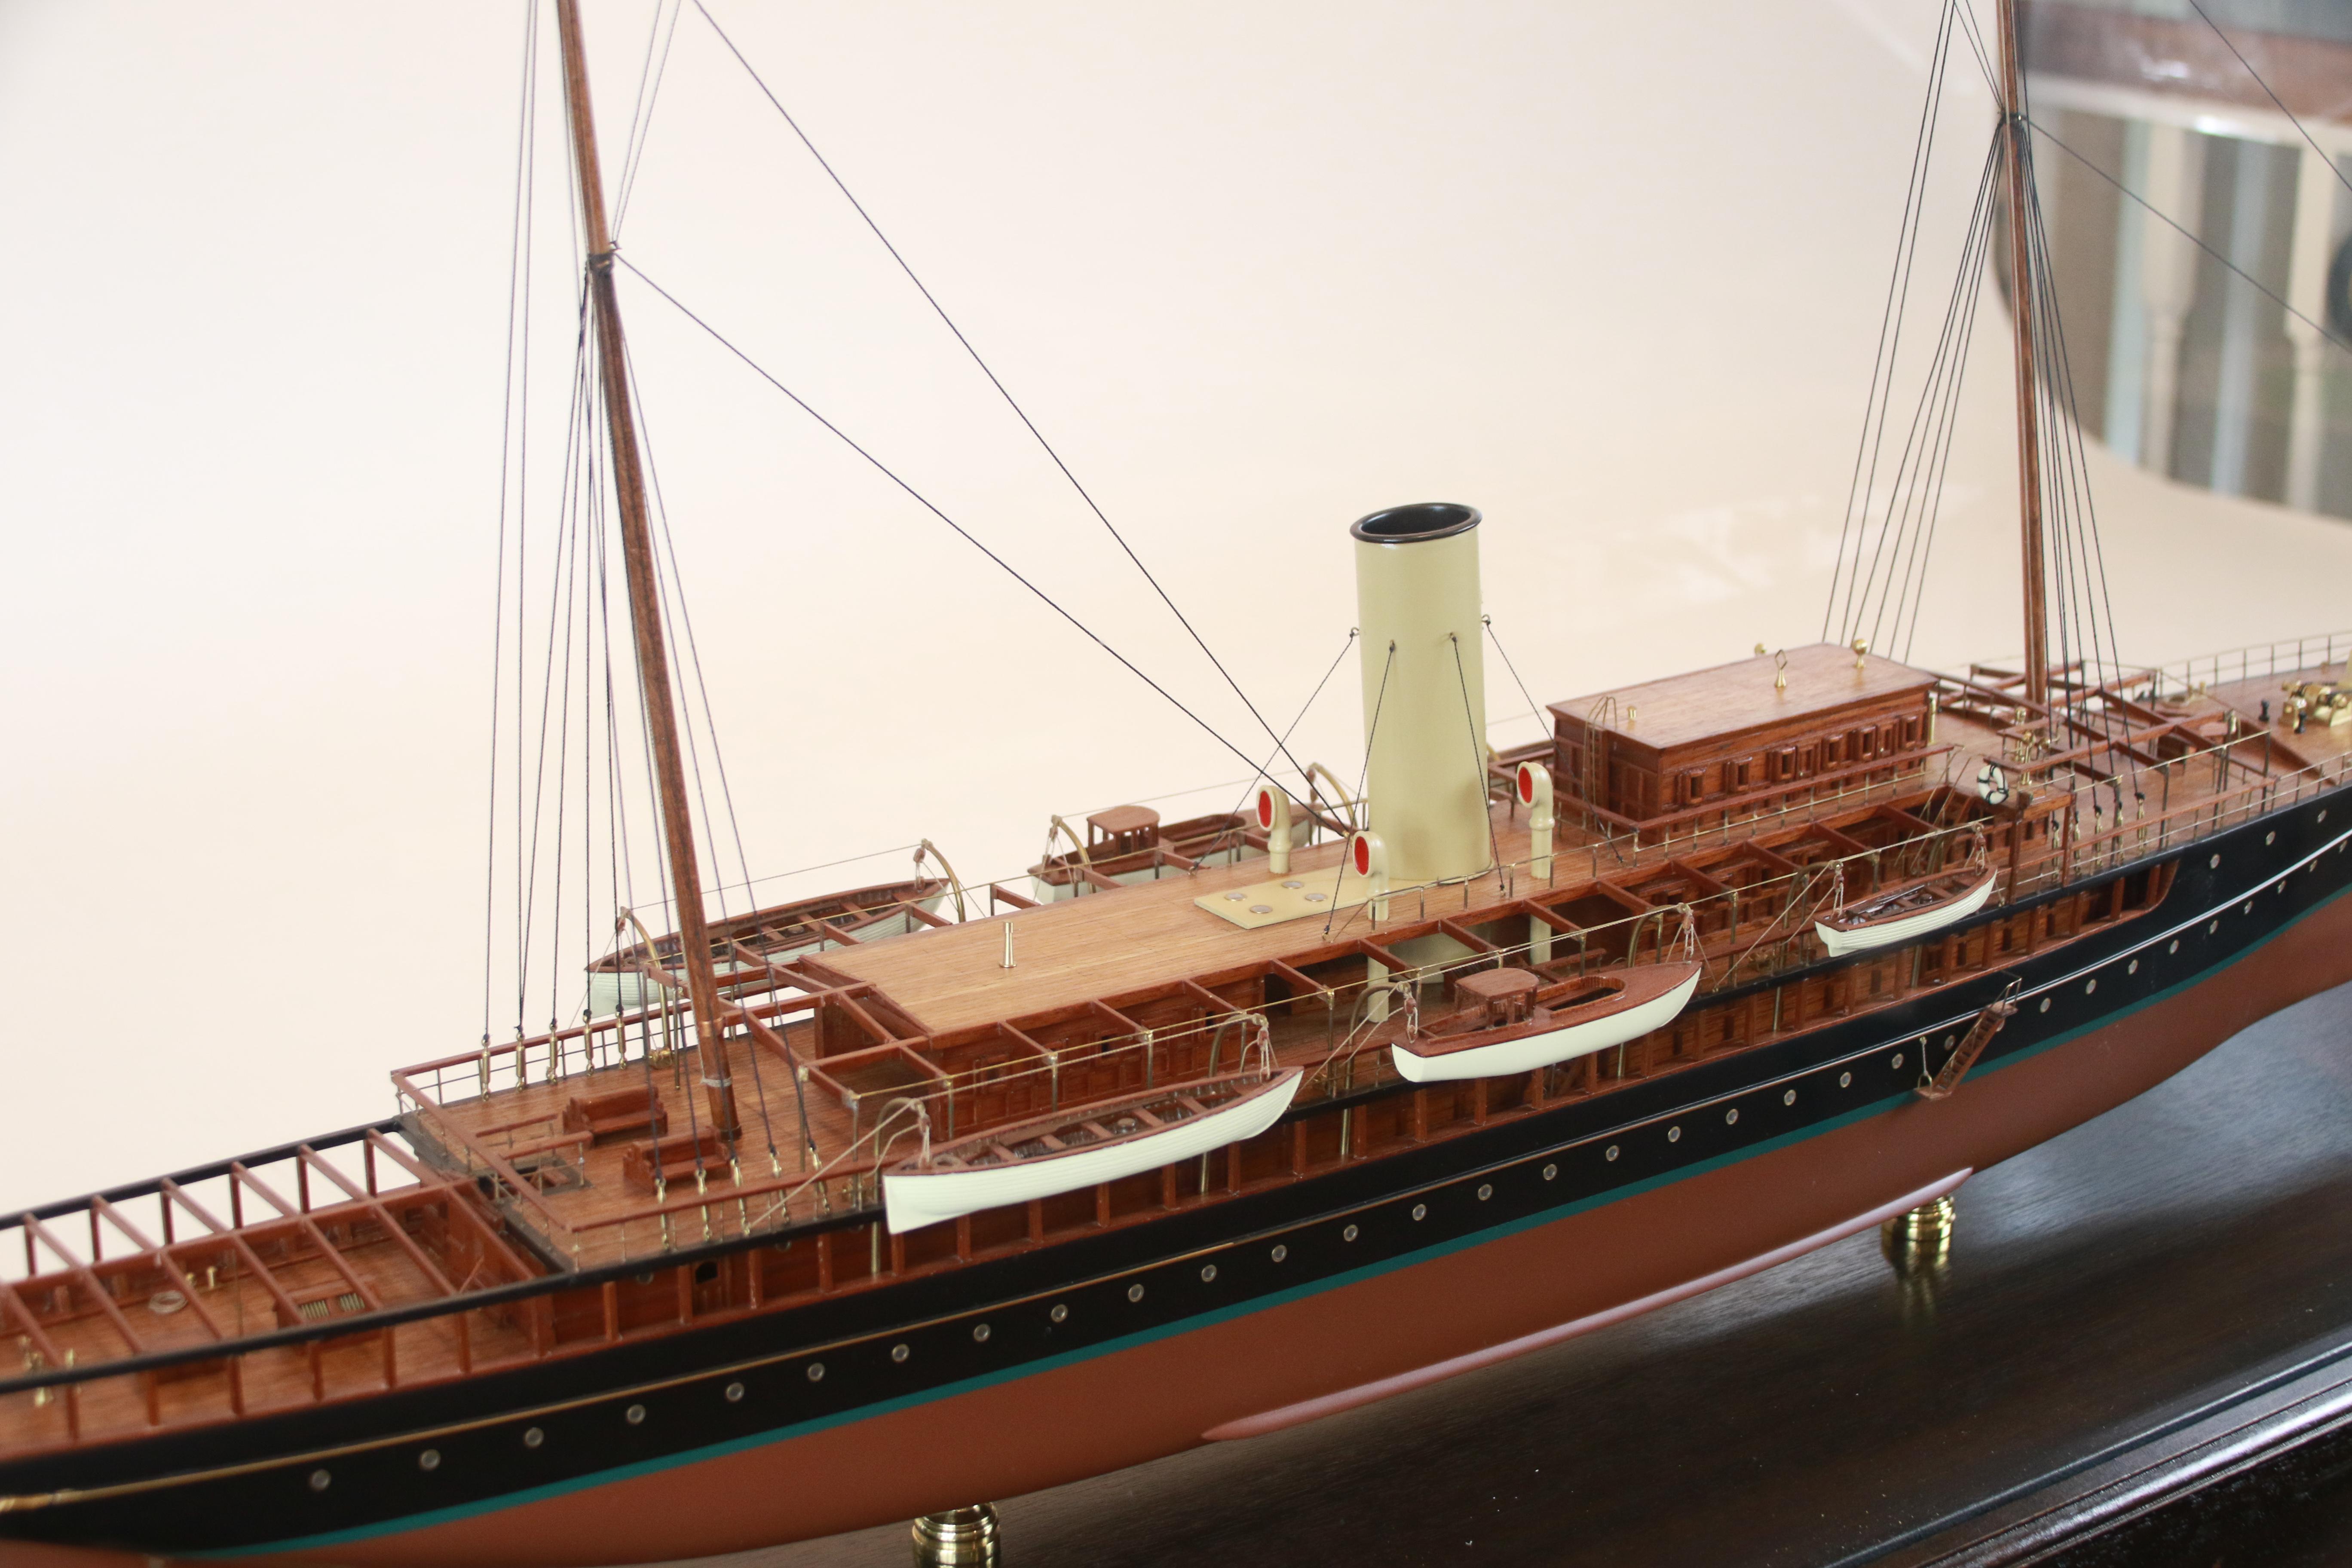 The Corsair IV of 1930 was a private steam yacht owned by J. Pierpont Morgan, jr. The model is mounted into a glass and brass display case and has numerous details including lifeboats hanging from davits, funnels, cabins, portholes, doors, ladders,